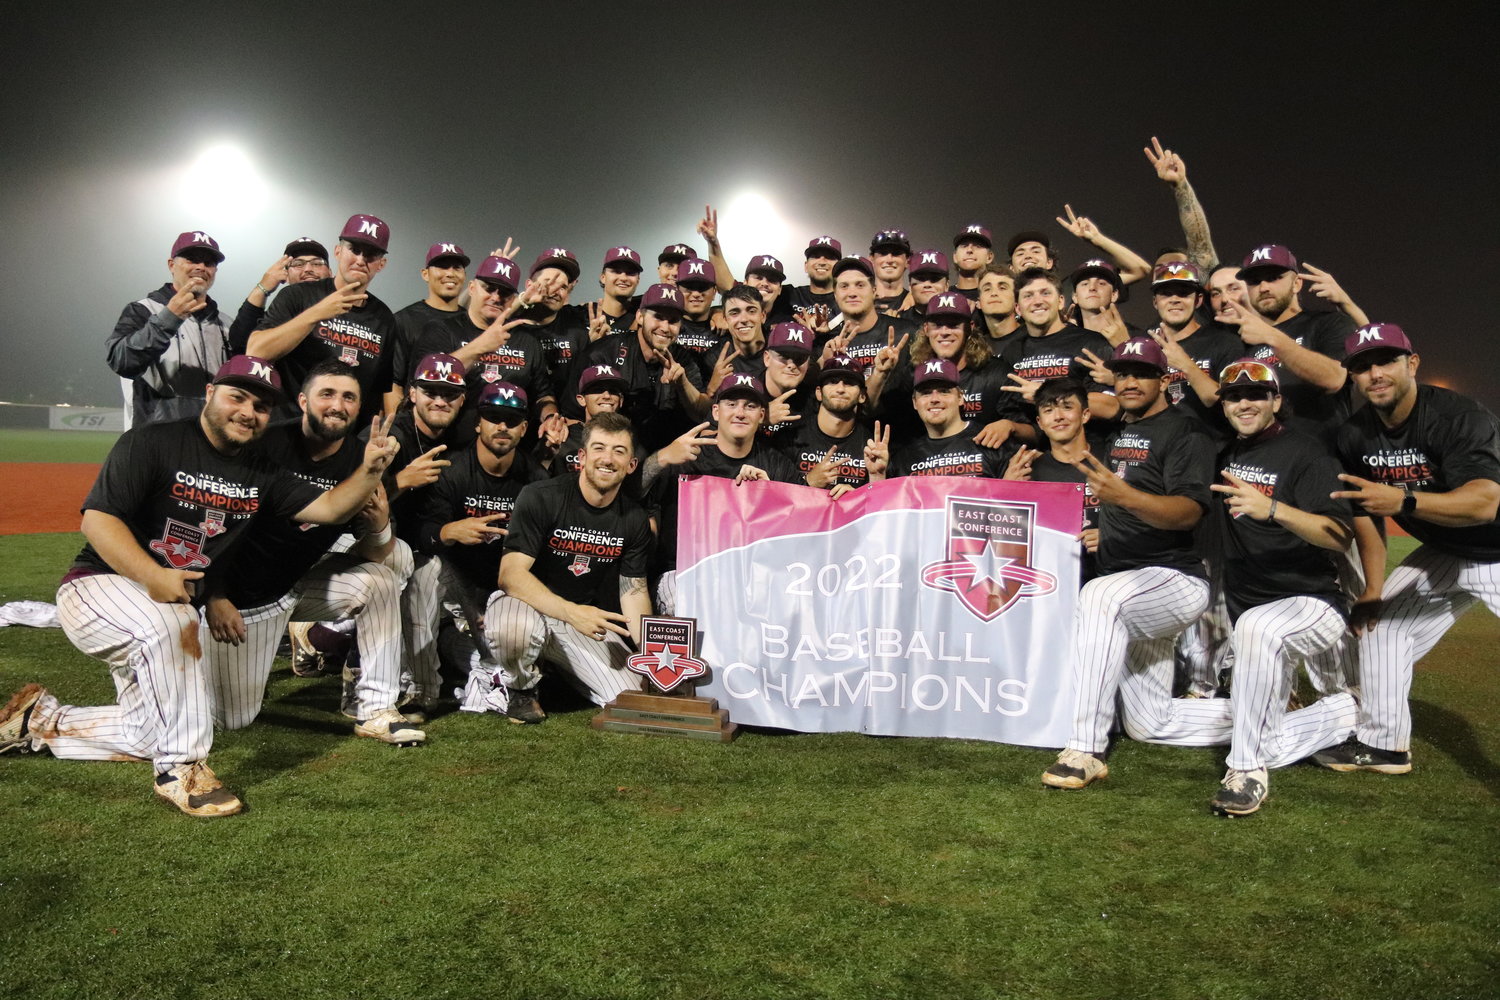 Molloy College’s baseball team won the East Coast Conference title with two thrilling victories over Queens College last Saturday.